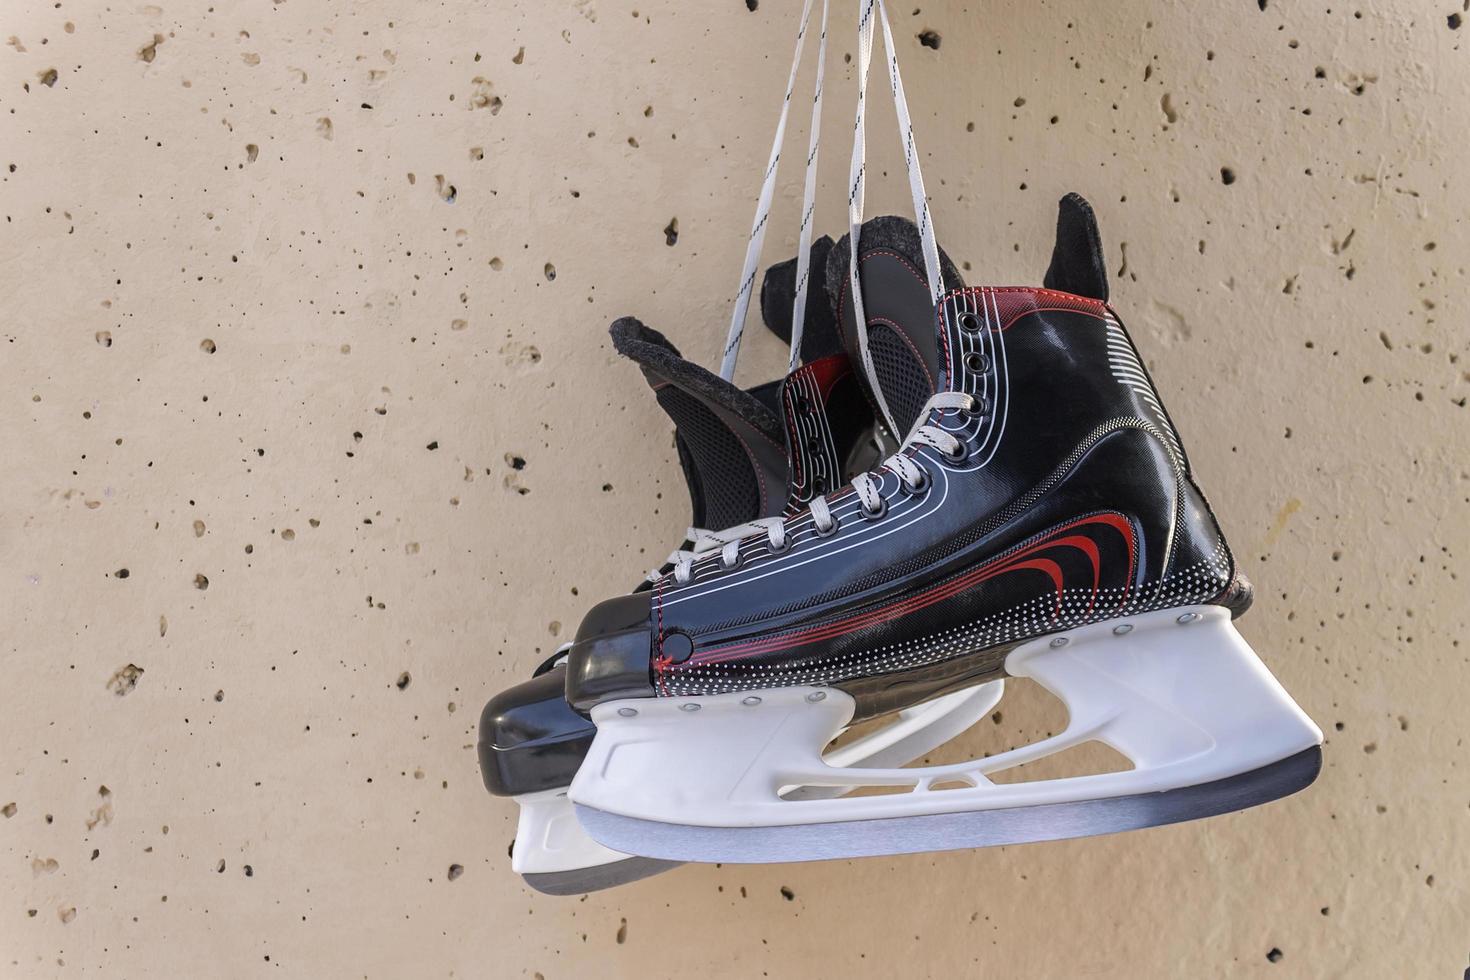 Winter skates hang on the wall as a symbol of career completion photo